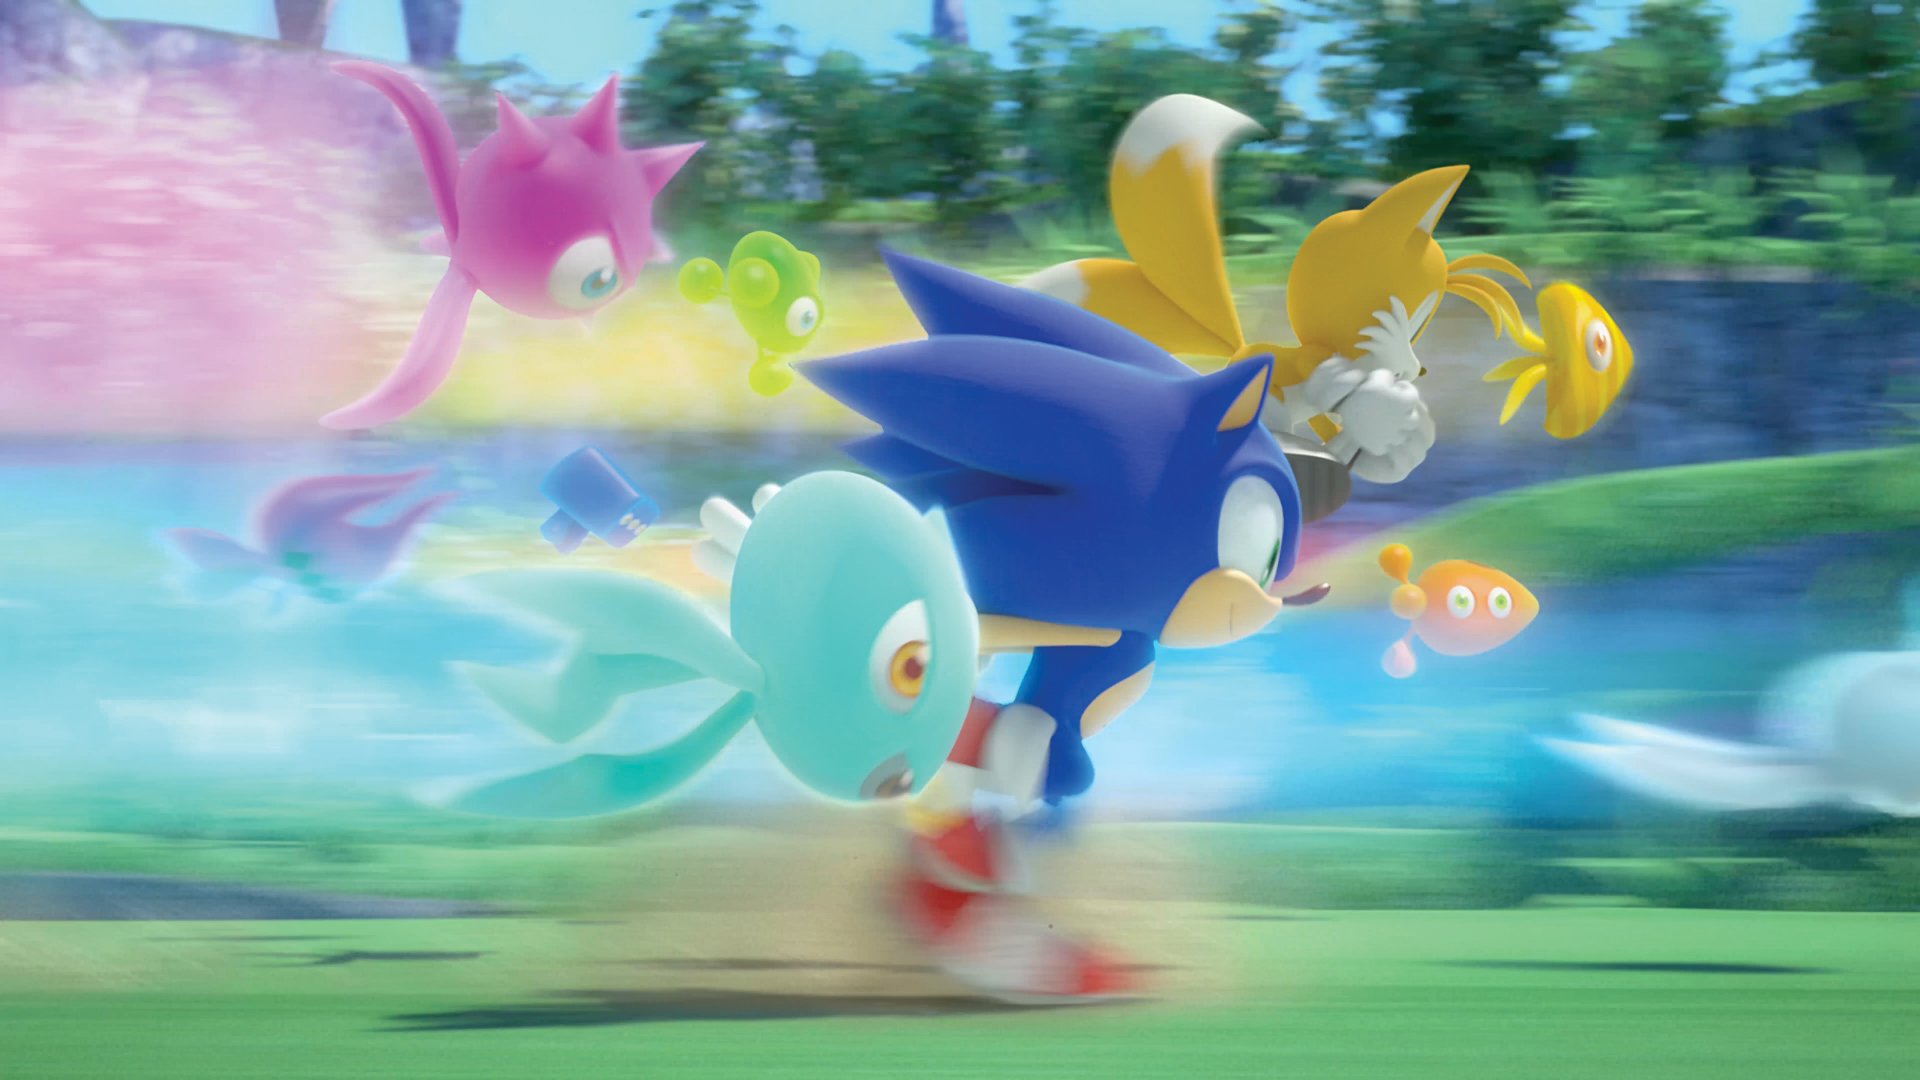 Sonic Colors Ultimate finally on Steam: Is the Game Worth it Now